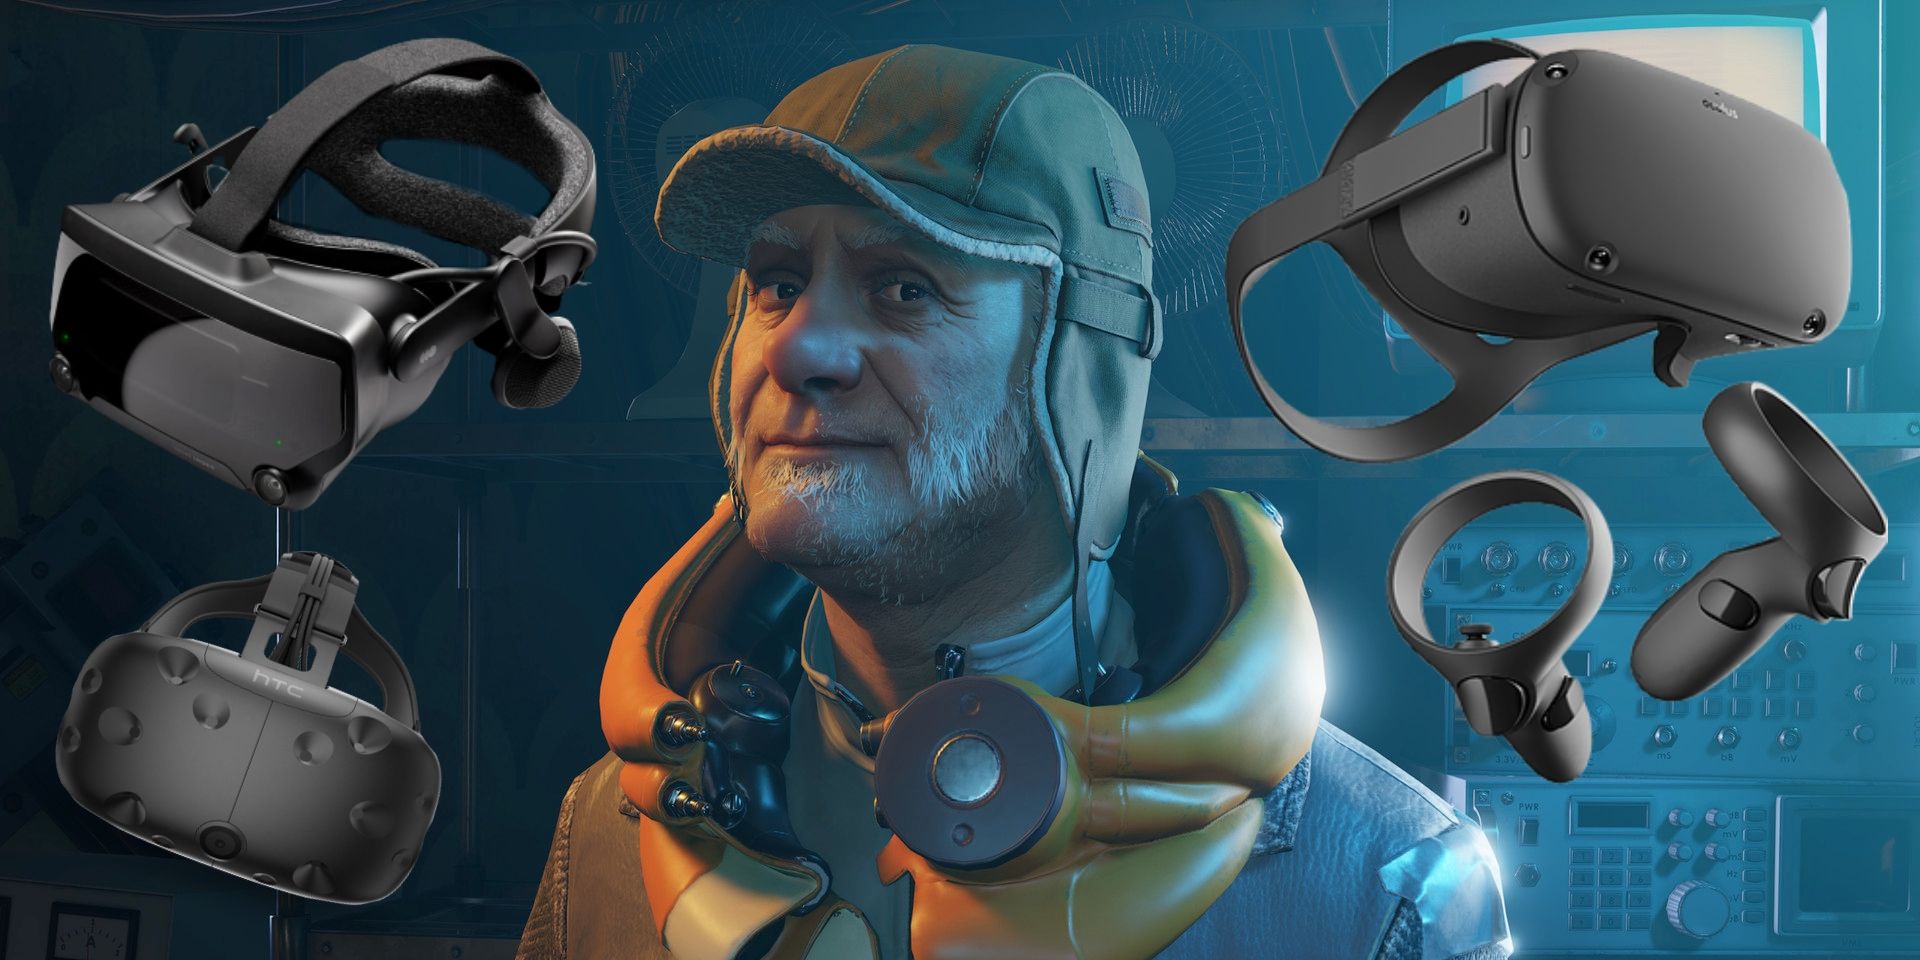 Half-Life: Alyx: The Benchmark For VR Gaming - Oculus Quest Review